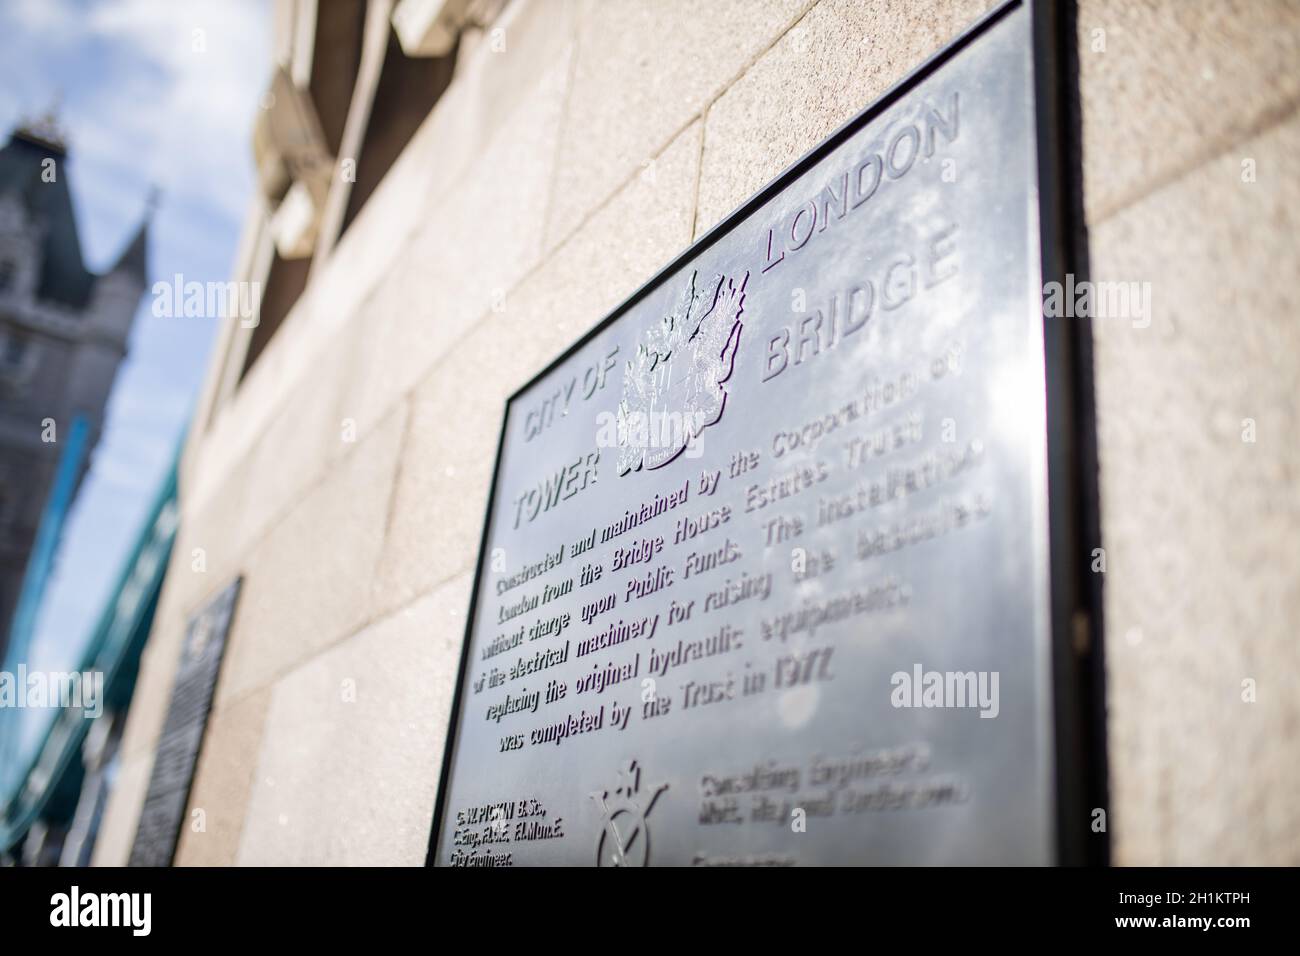 London, UK - September 30, 2020: Landscape view of the Tower Bridge -inaugurated in 1894- commemorative plaque with its history written on it, and wit Stock Photo